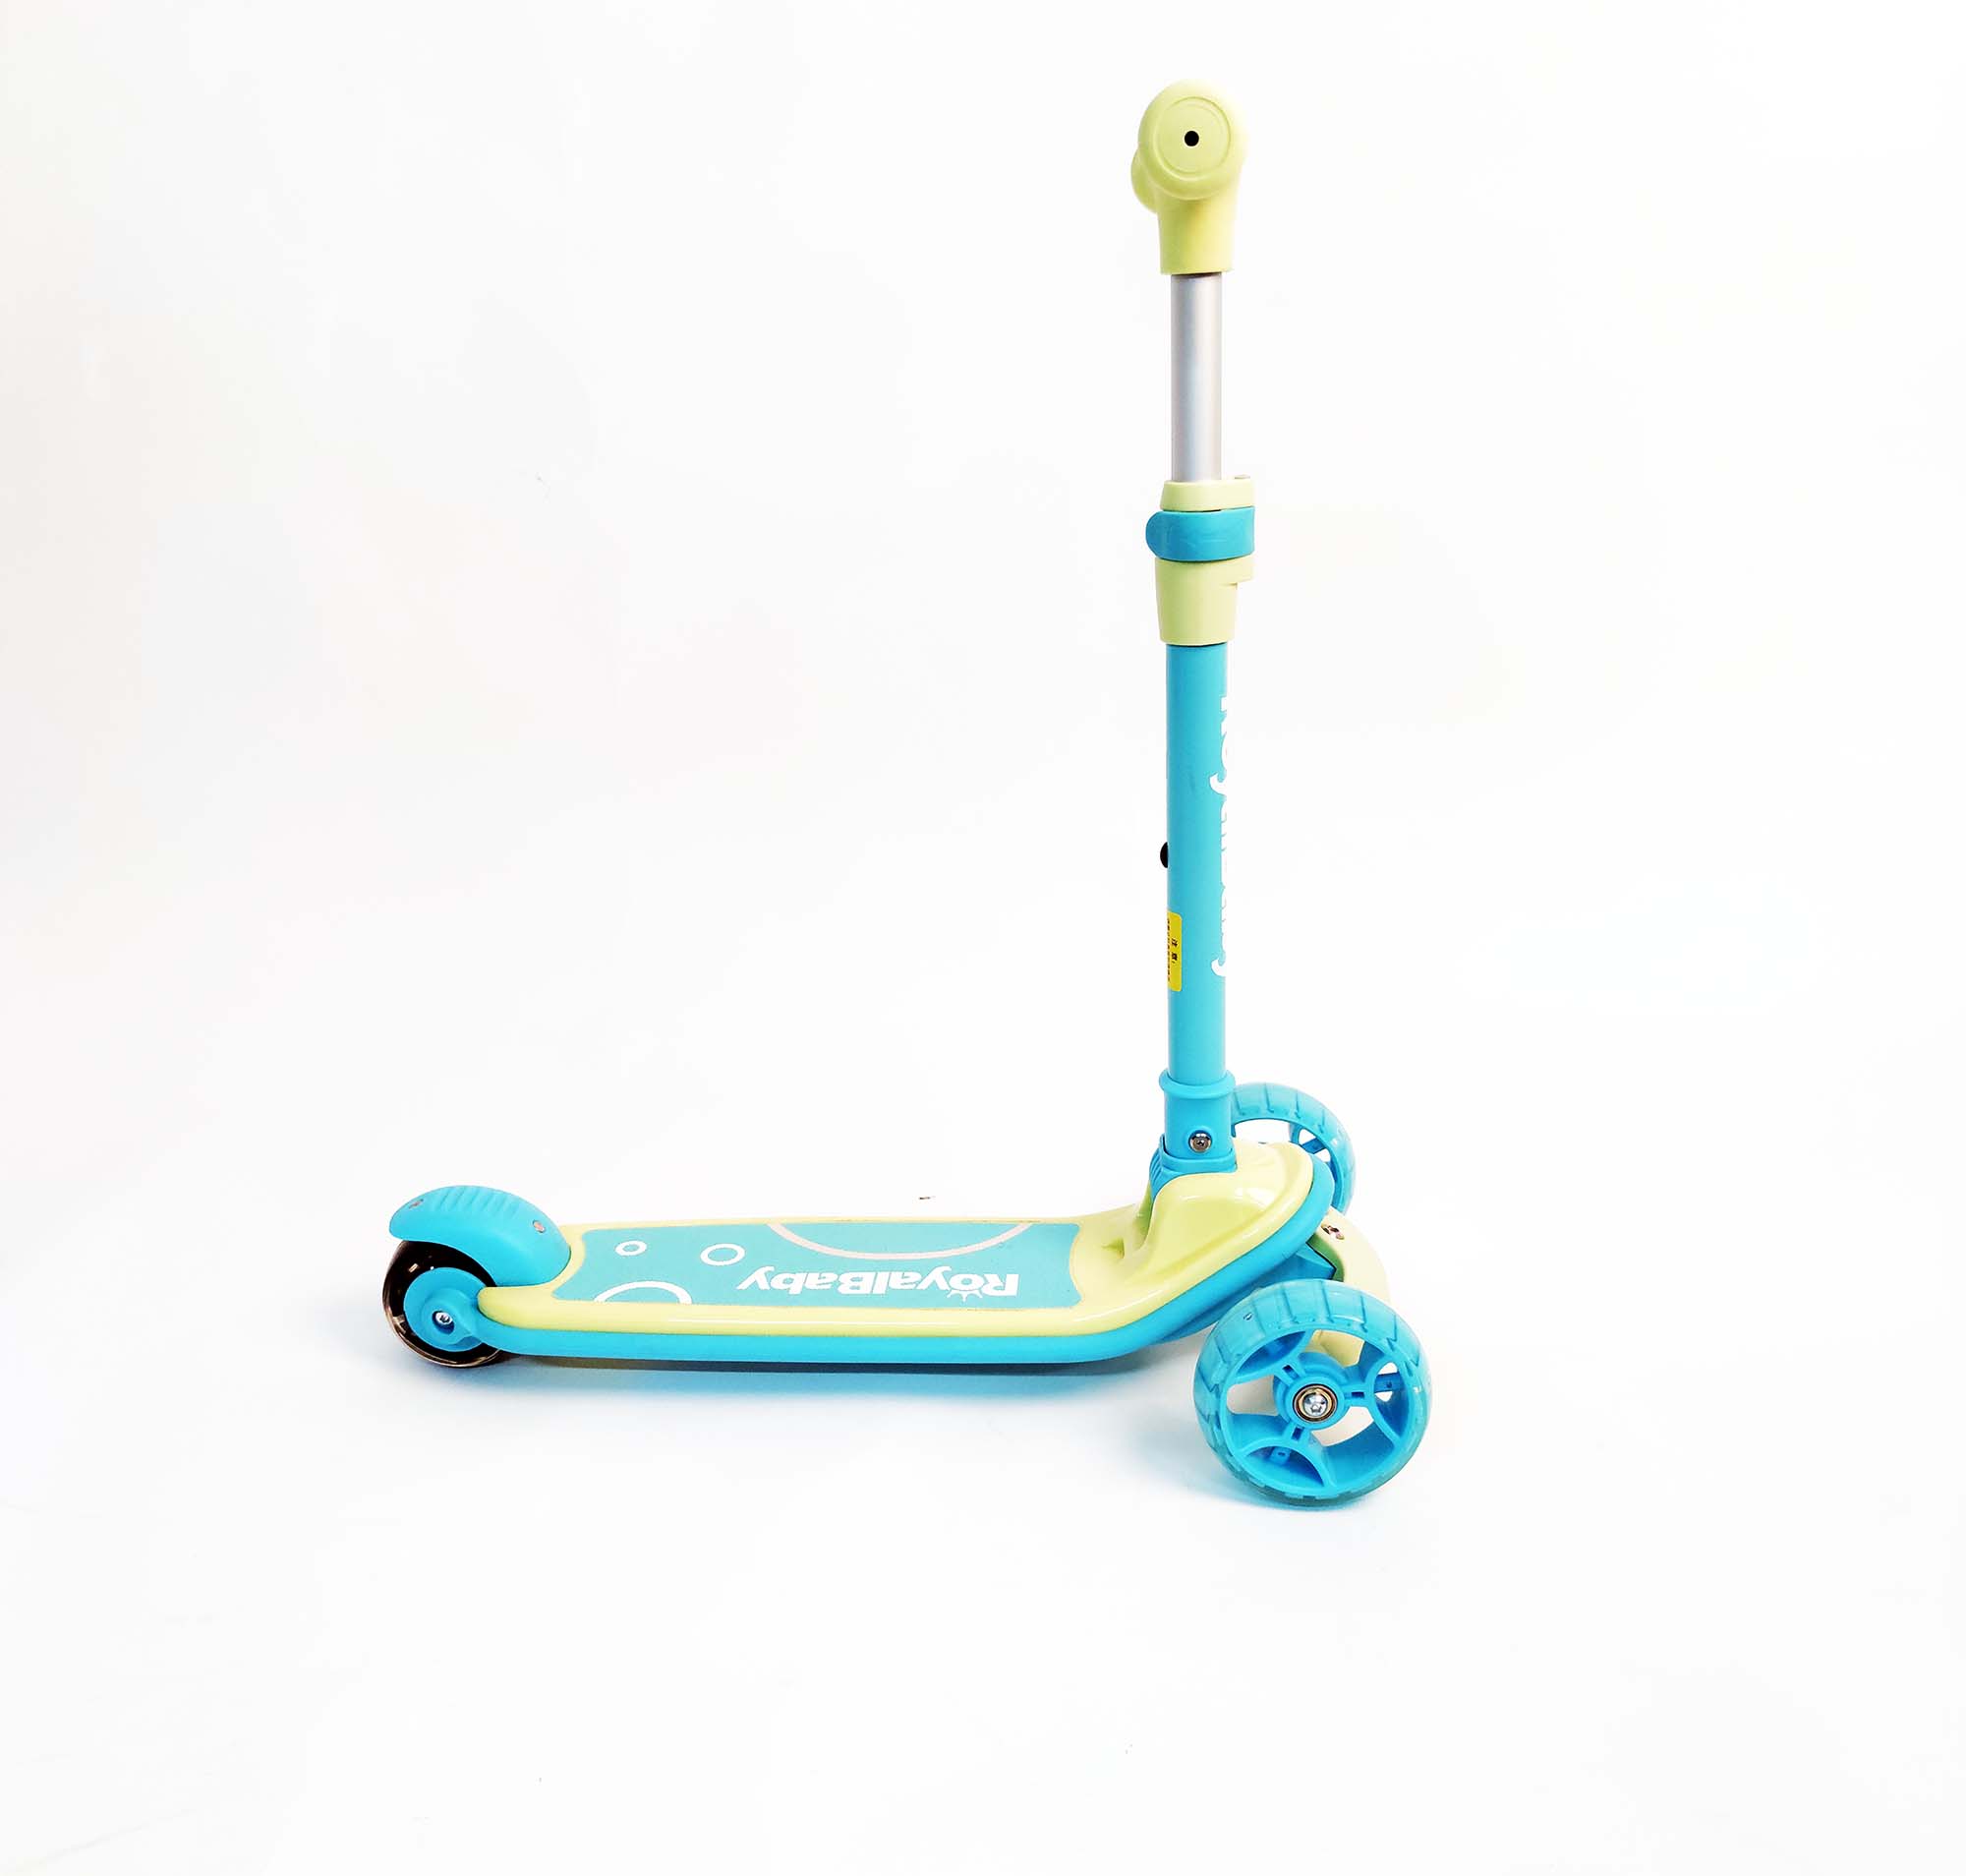 Royal Baby Scooter Royal Baby Foldable 89 Amarill/verde